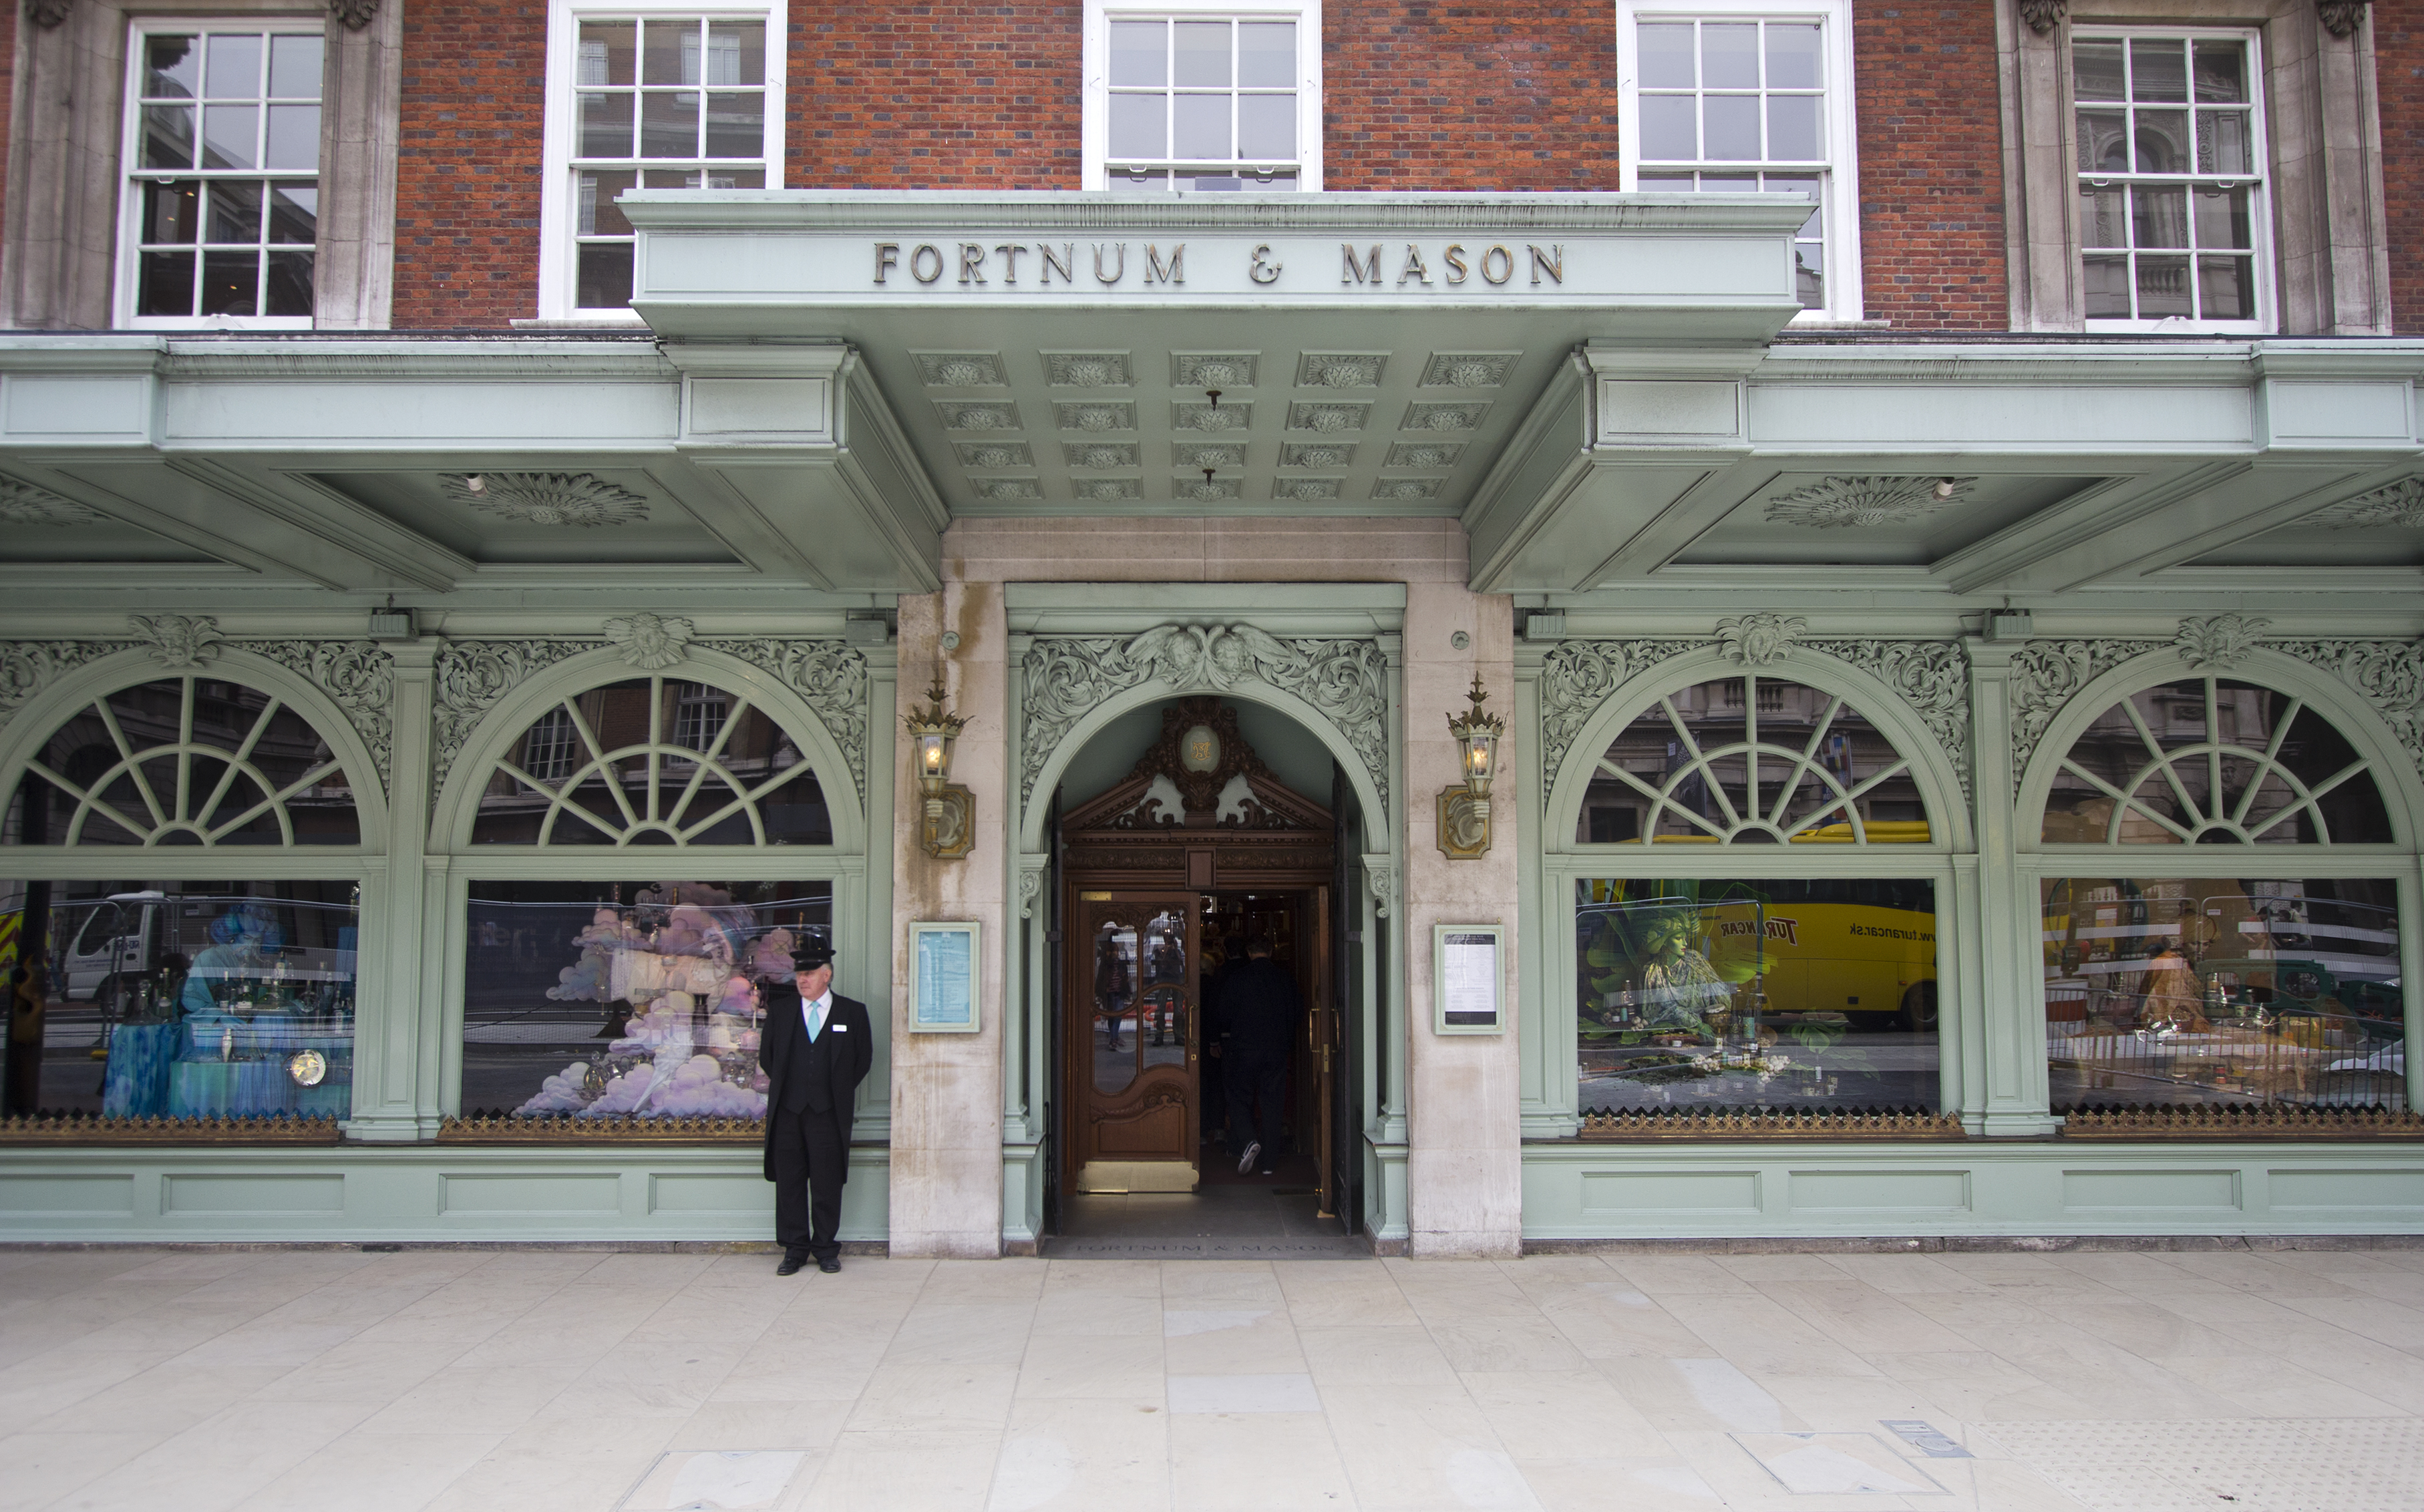 Ten Interesting Facts about Fortnum & Mason You Might Not Know